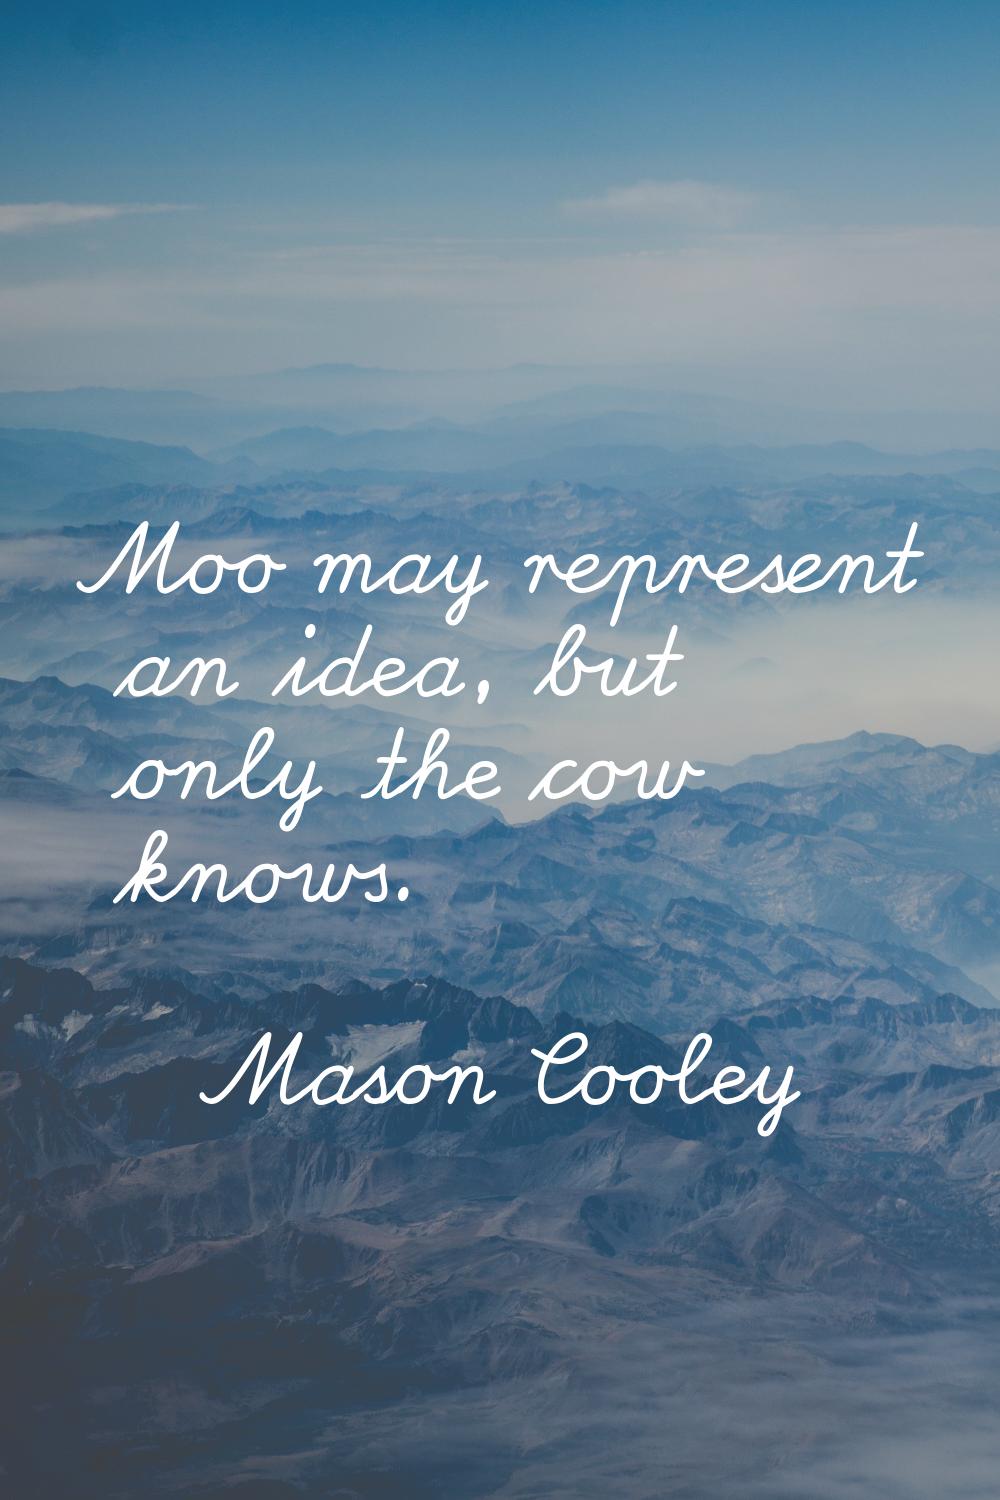 Moo may represent an idea, but only the cow knows.